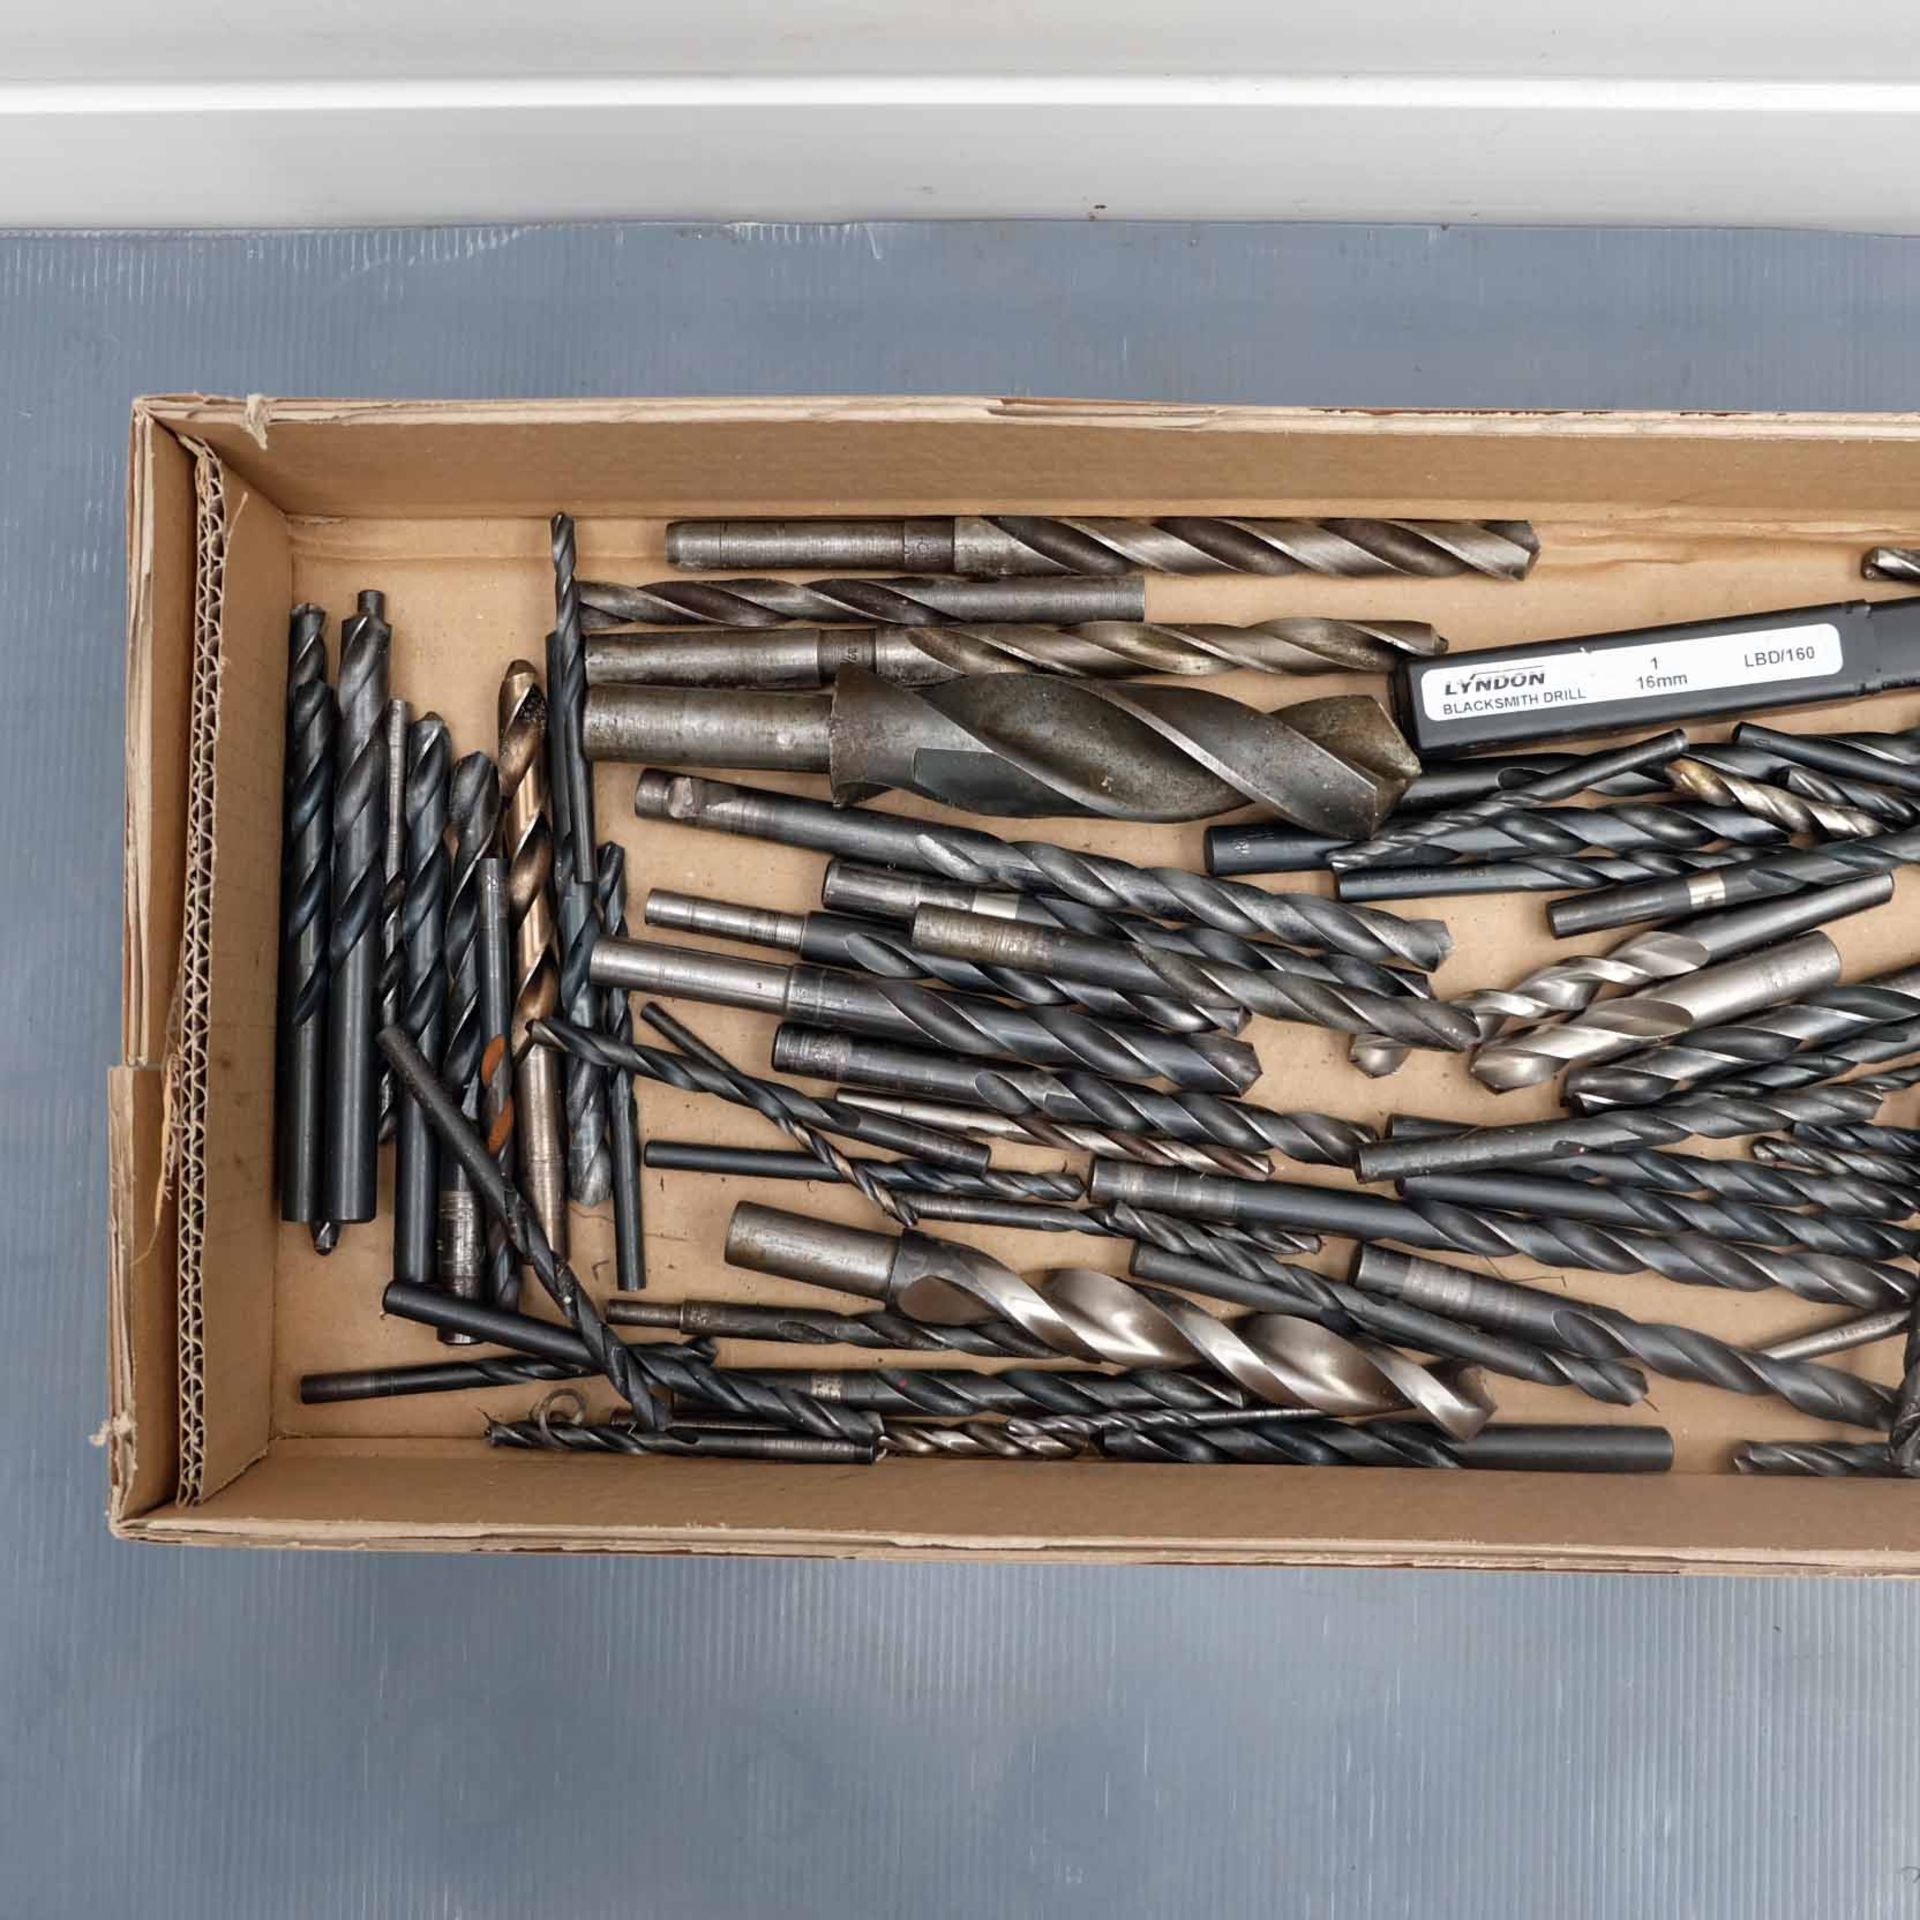 Quantity of Straight Shank Twist Drills. Various Sizes. - Image 2 of 3